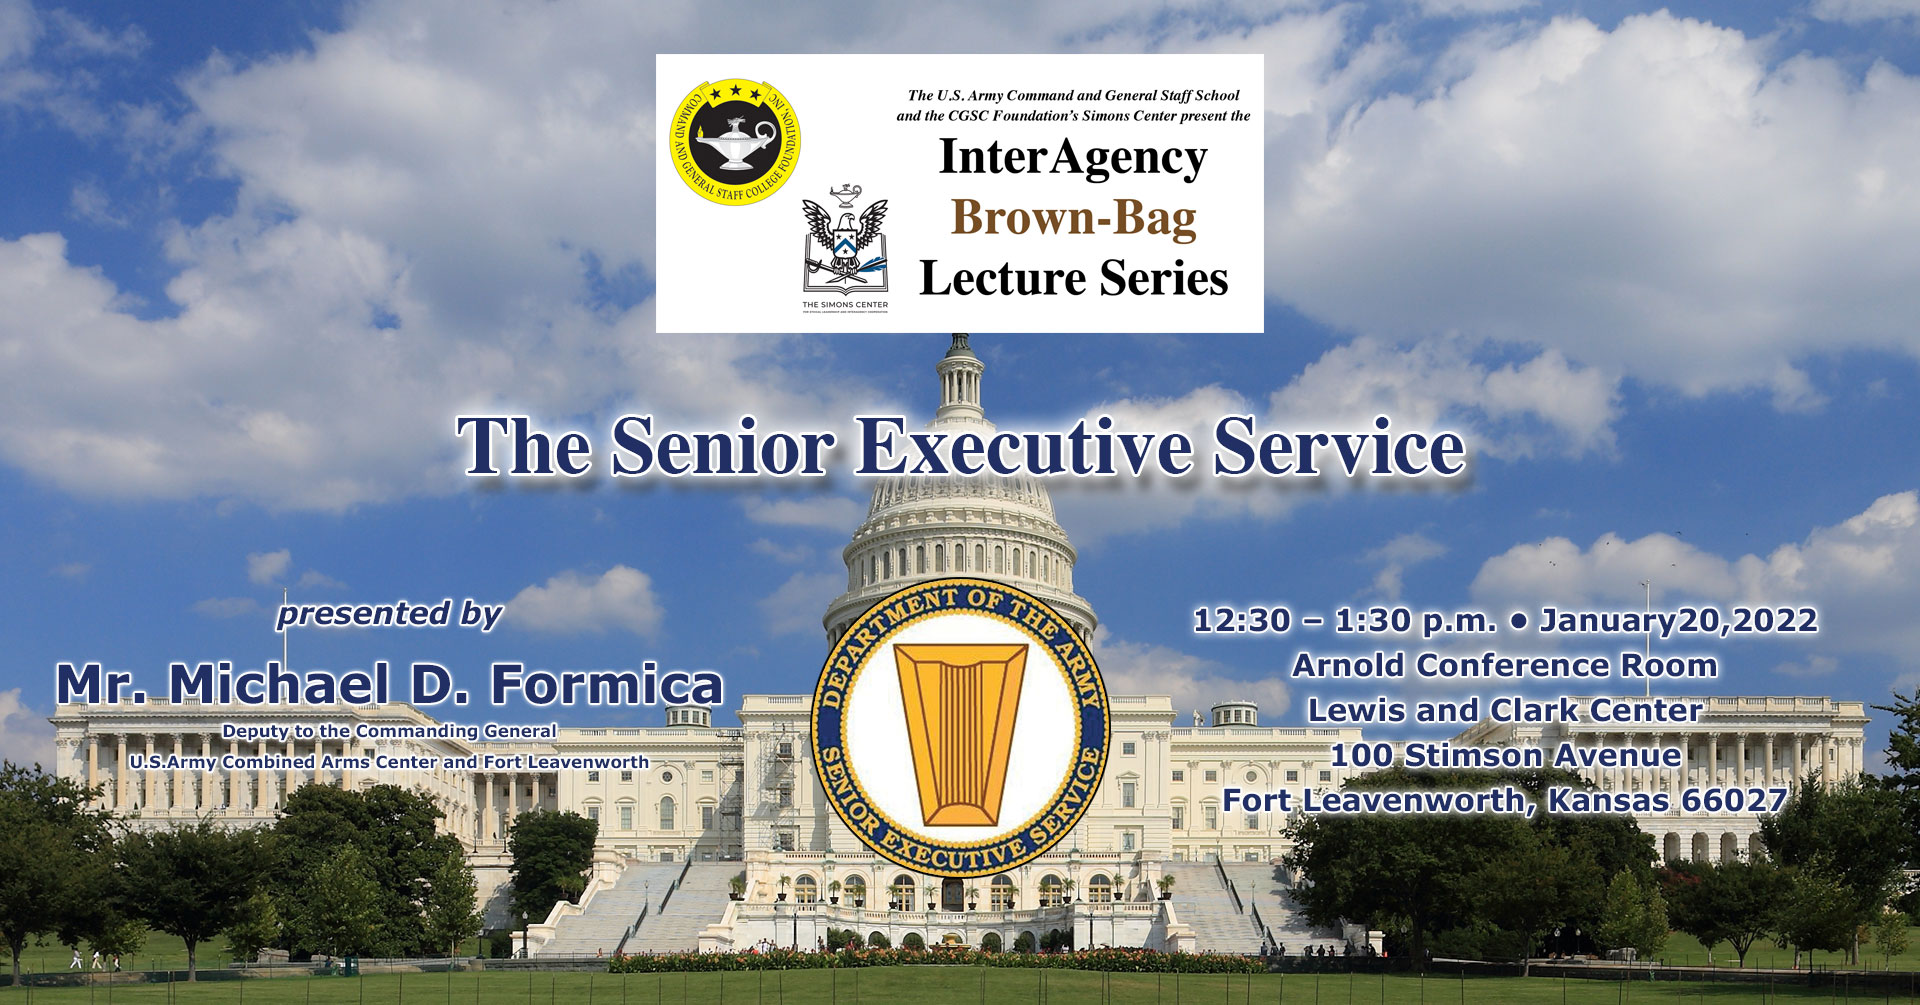 Composite image - U.S. Capitol building in the background; InterAgency Brown-Bag Lecture logo at top with subject and date of upcoming lecture in text below.